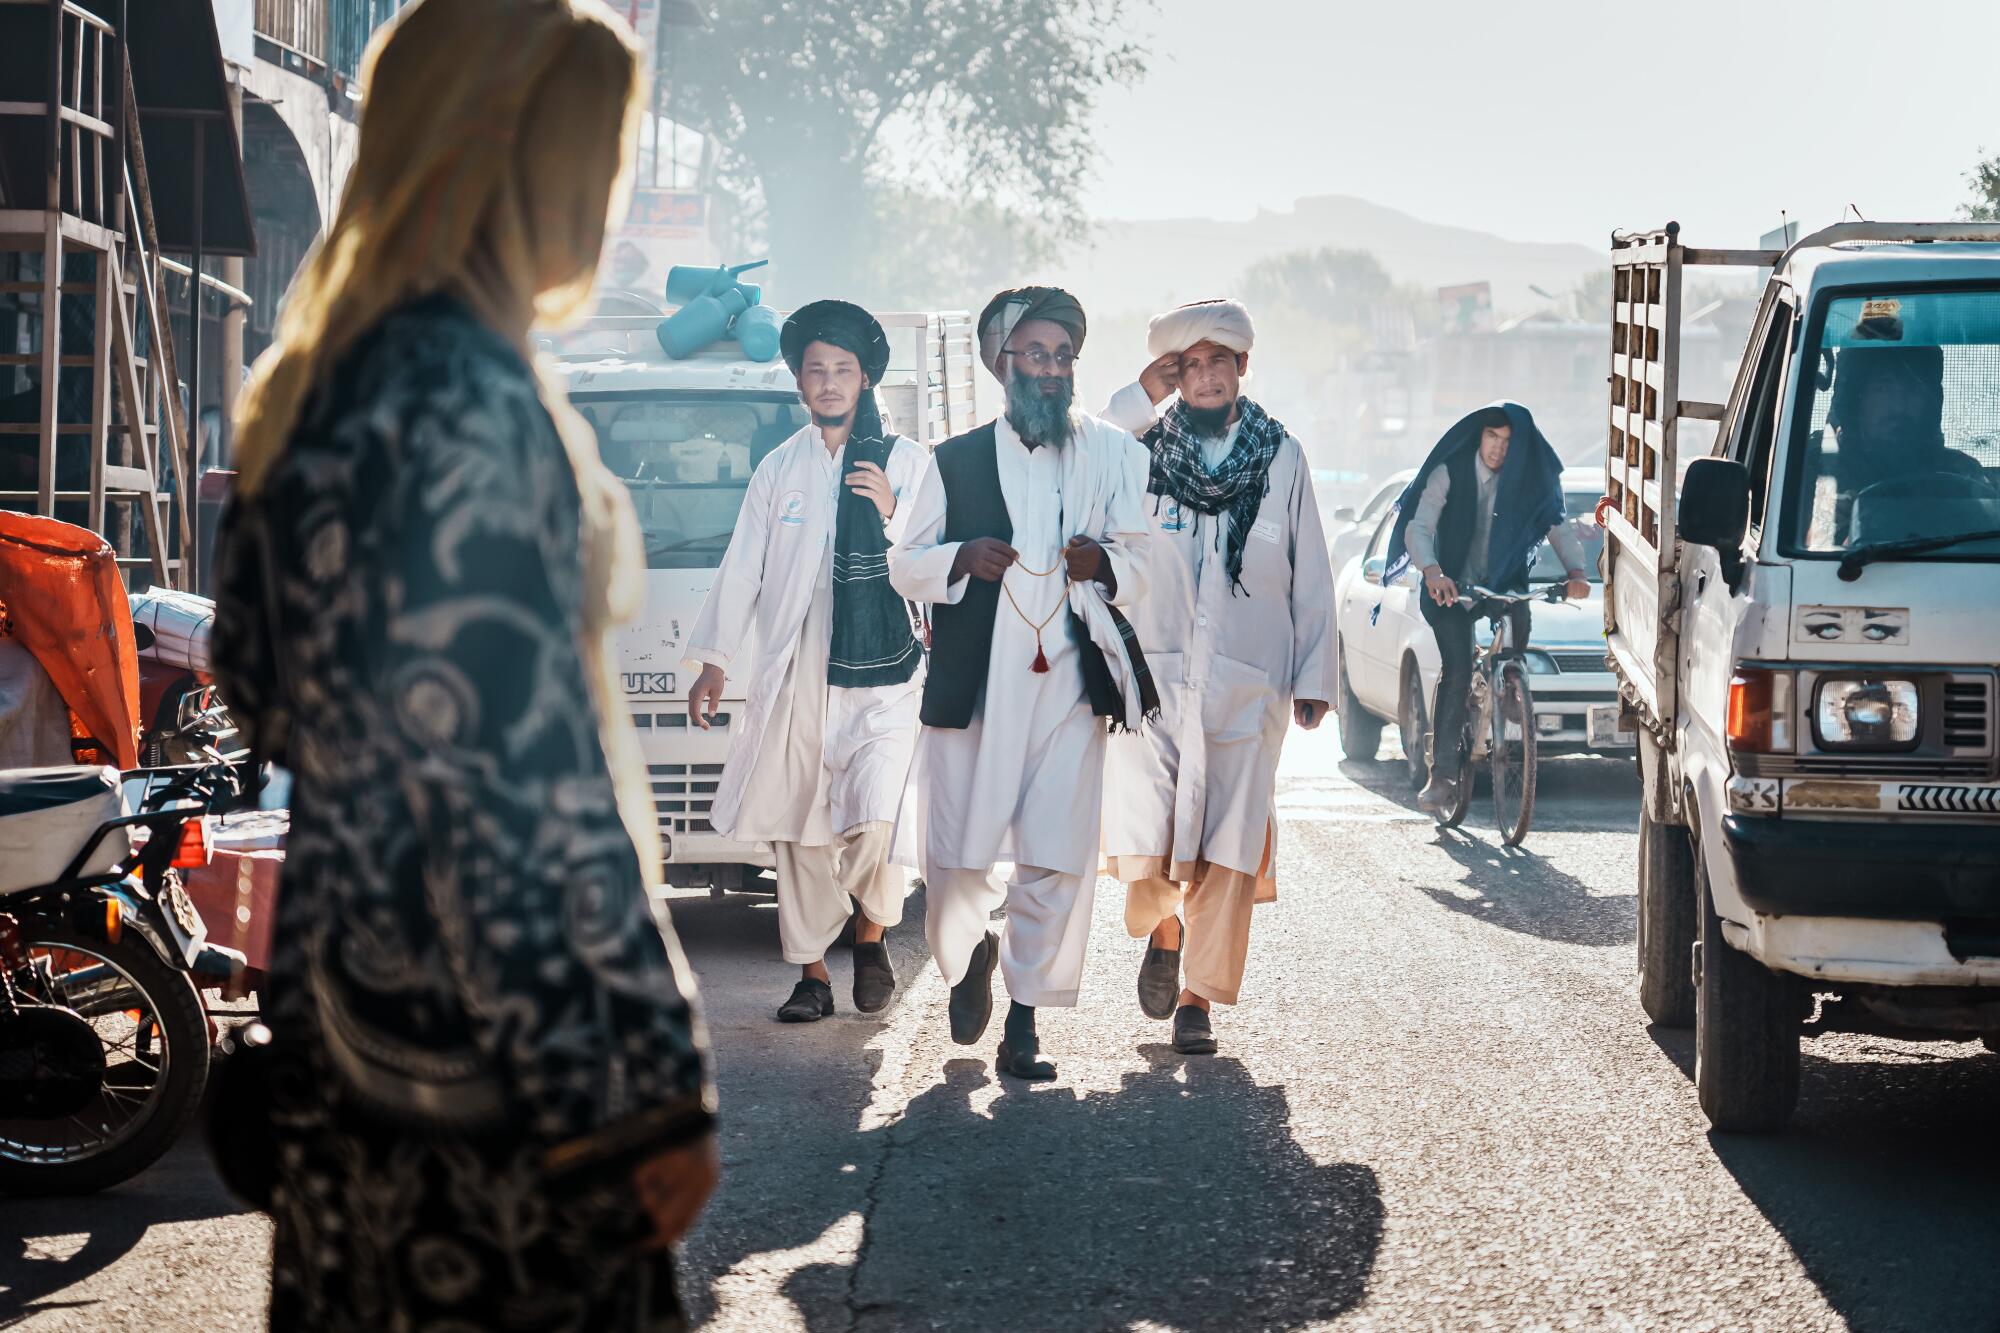 Taliban morality police patrol the streets to enforce dress codes